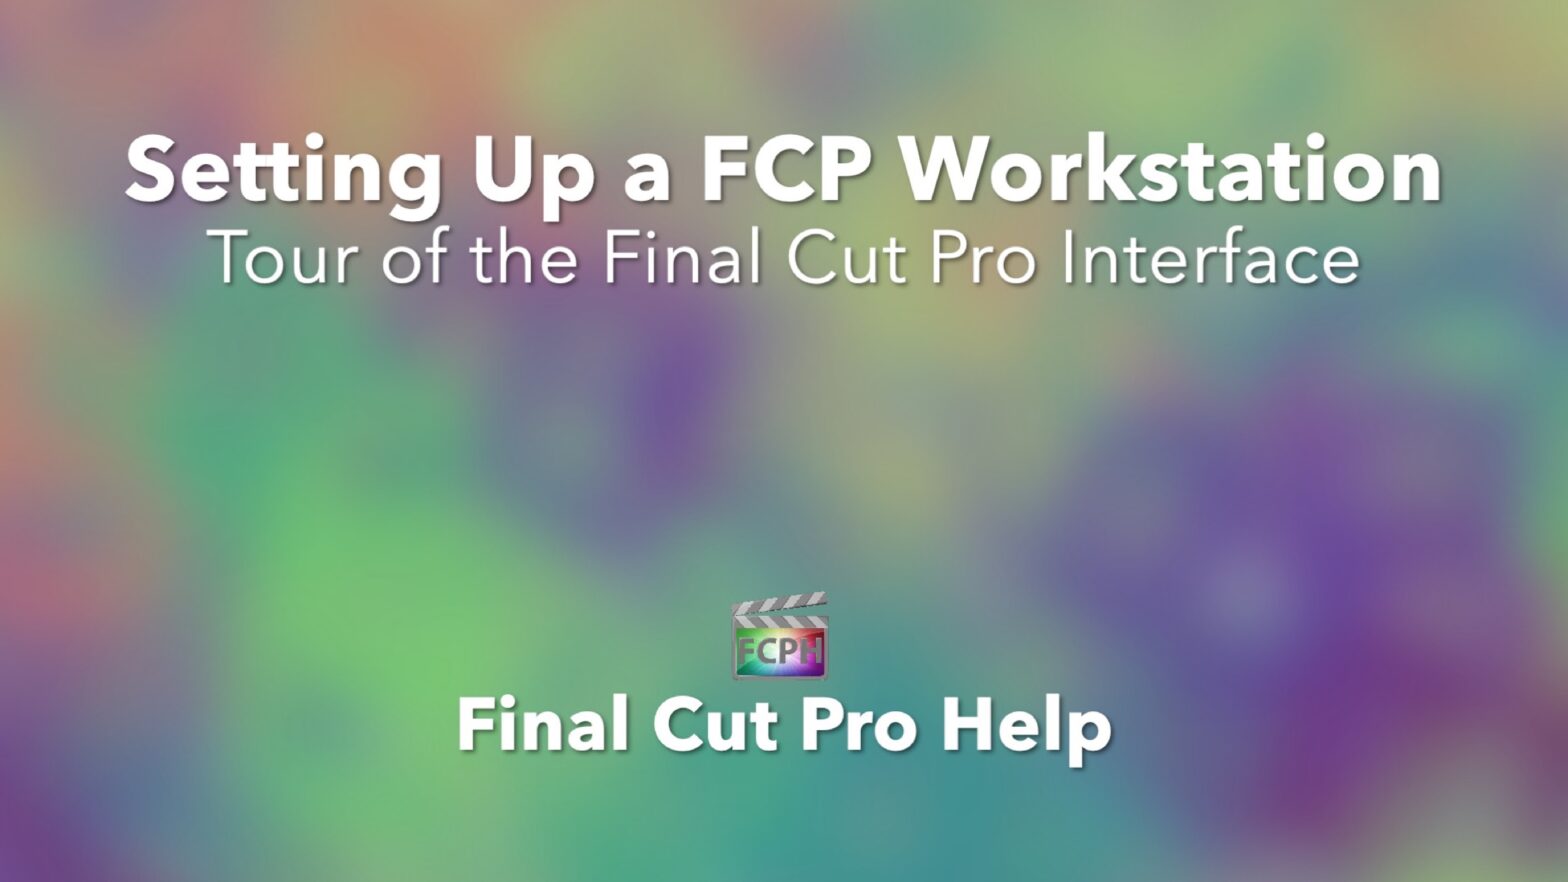 Setting Up a FCP Workstation Tour of the Final Cut Pro Interface